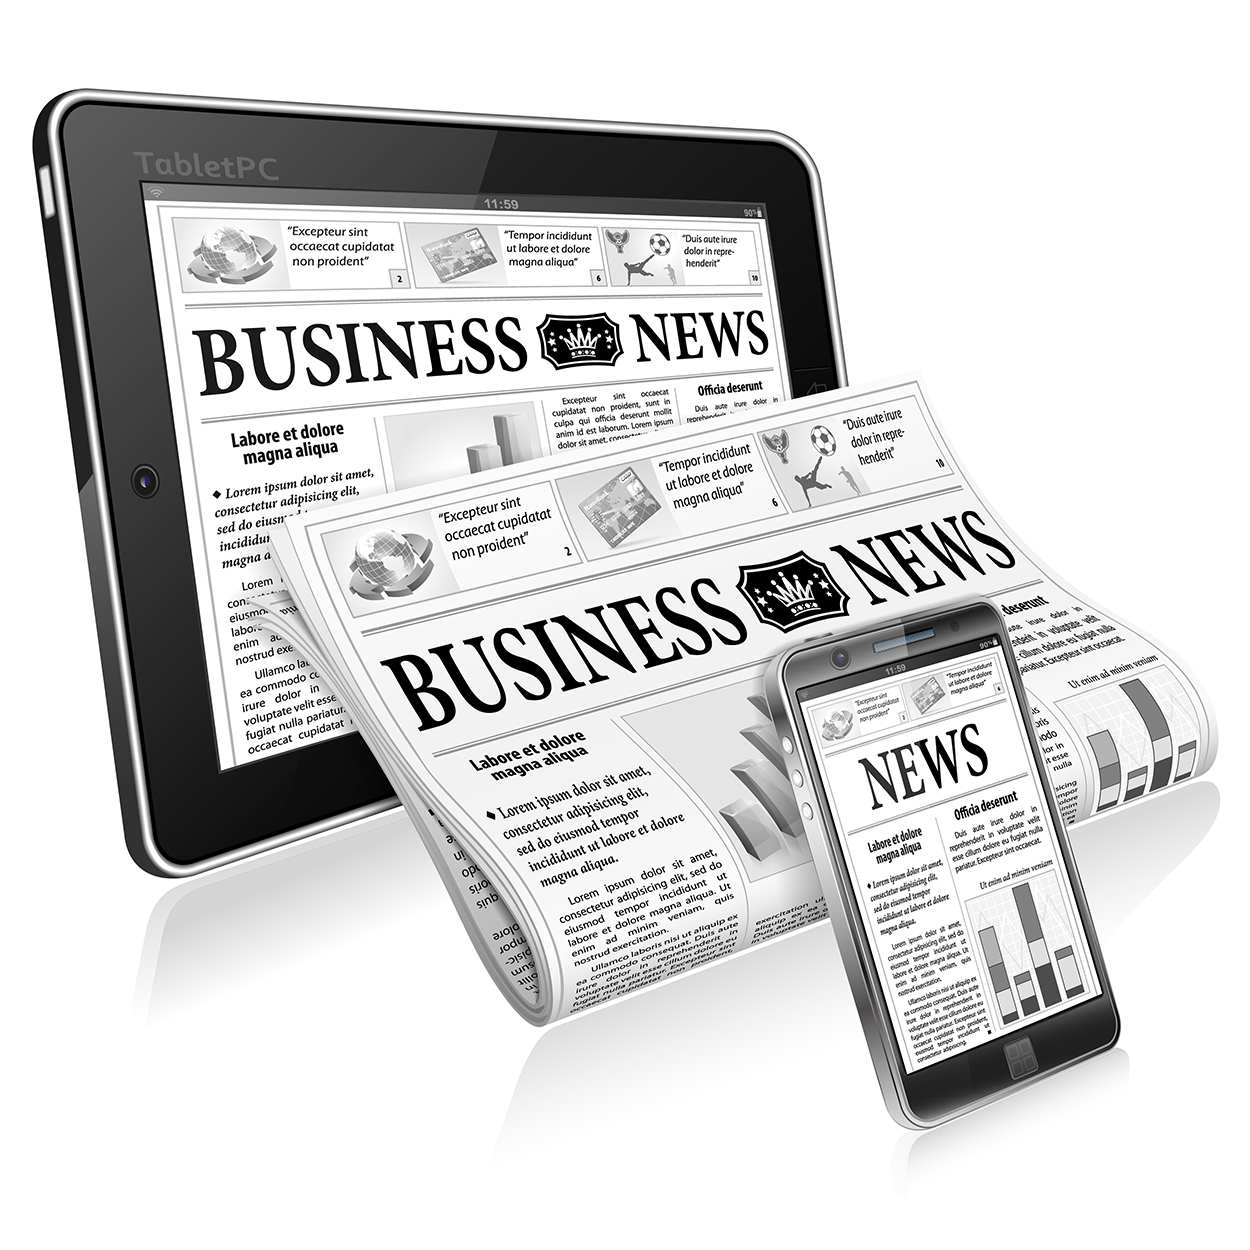 news on tablet, newspaper, and mobile phone